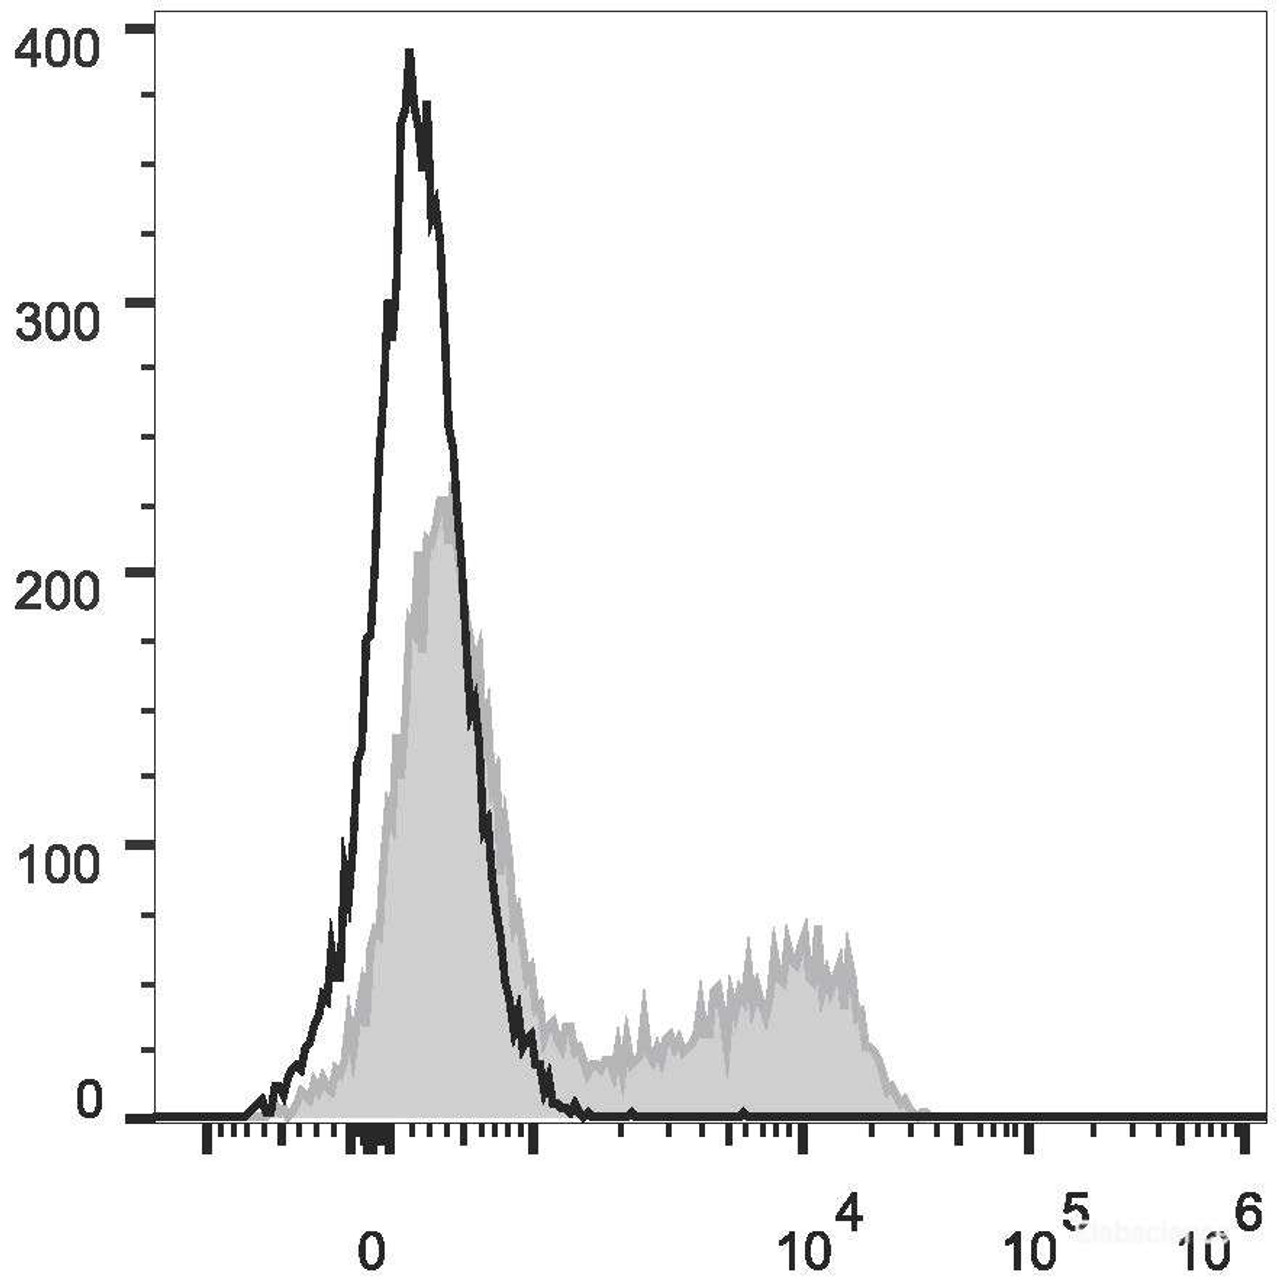 Human peripheral blood lymphocytes are stained with PercP Anti-Human CD45RO Antibody(filled gray histogram). Unstained lymphocytes (empty black histogram) are used as control.